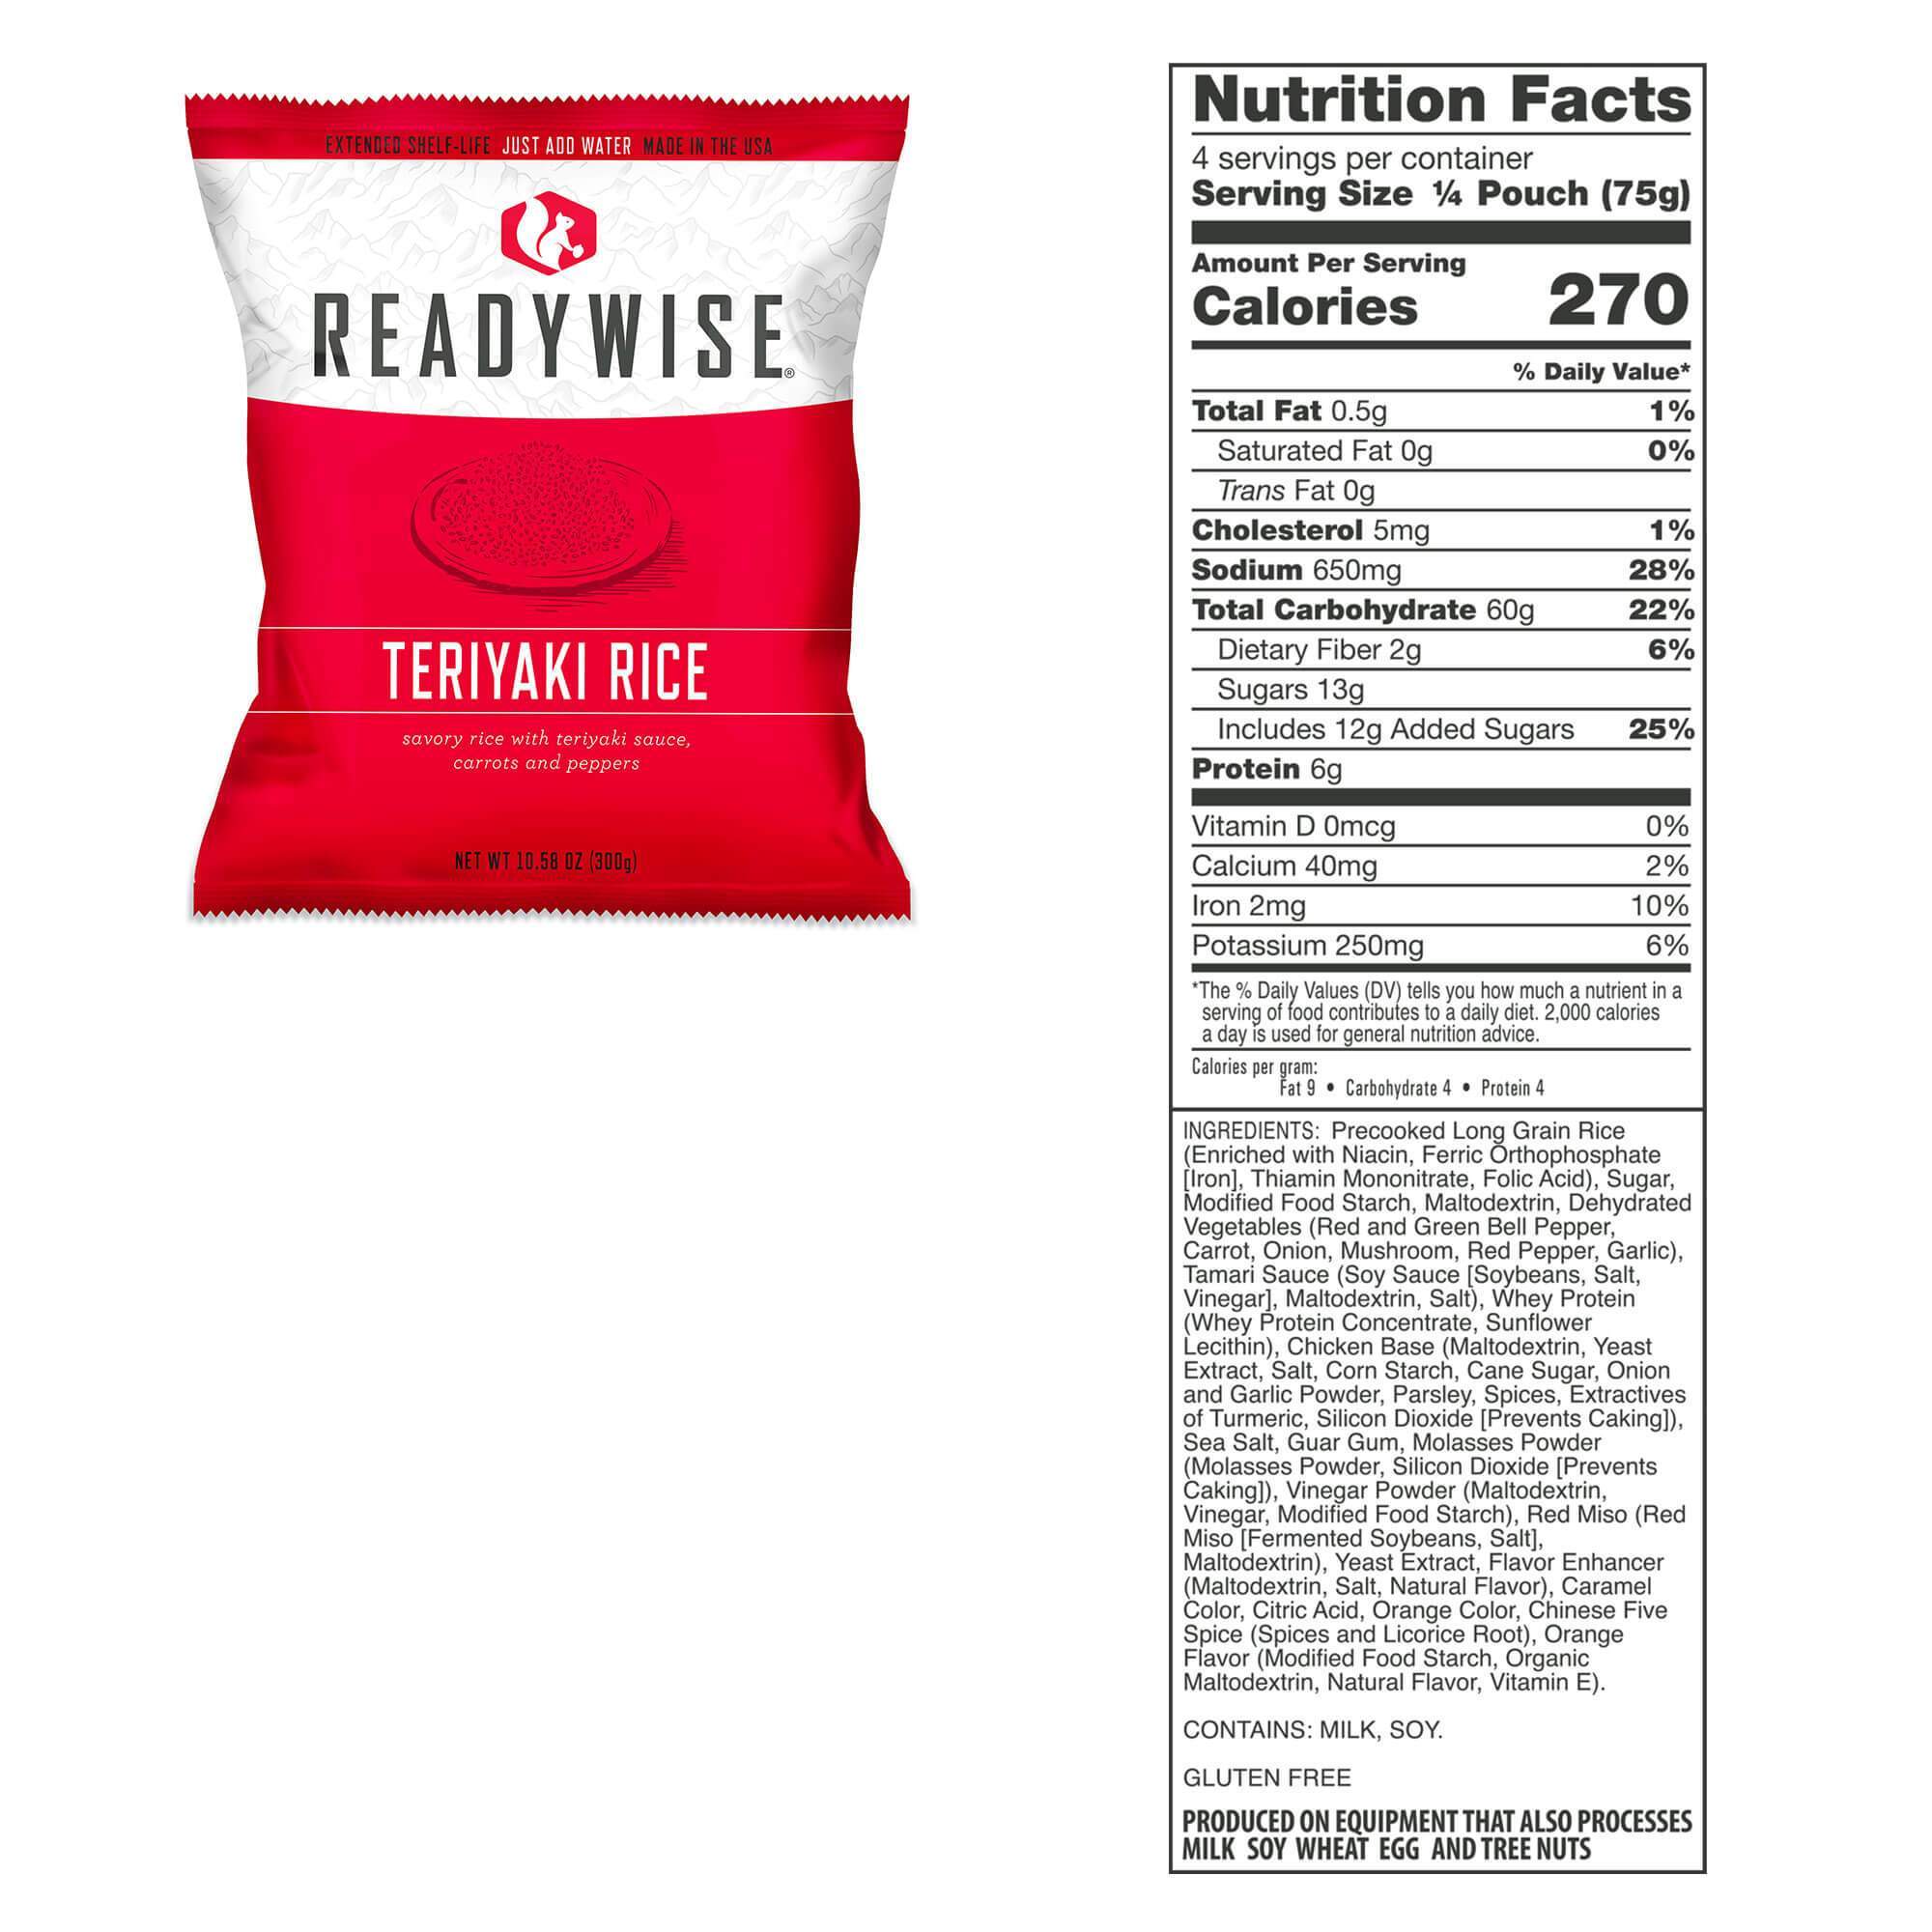 ReadyWise (formerly Wise Food Storage) 720 Servings of ReadyWise Emergency Survival Food Storage (SHIPS IN 1-2 WEEKS) readywise readywise readywise readywise readywise readywise.